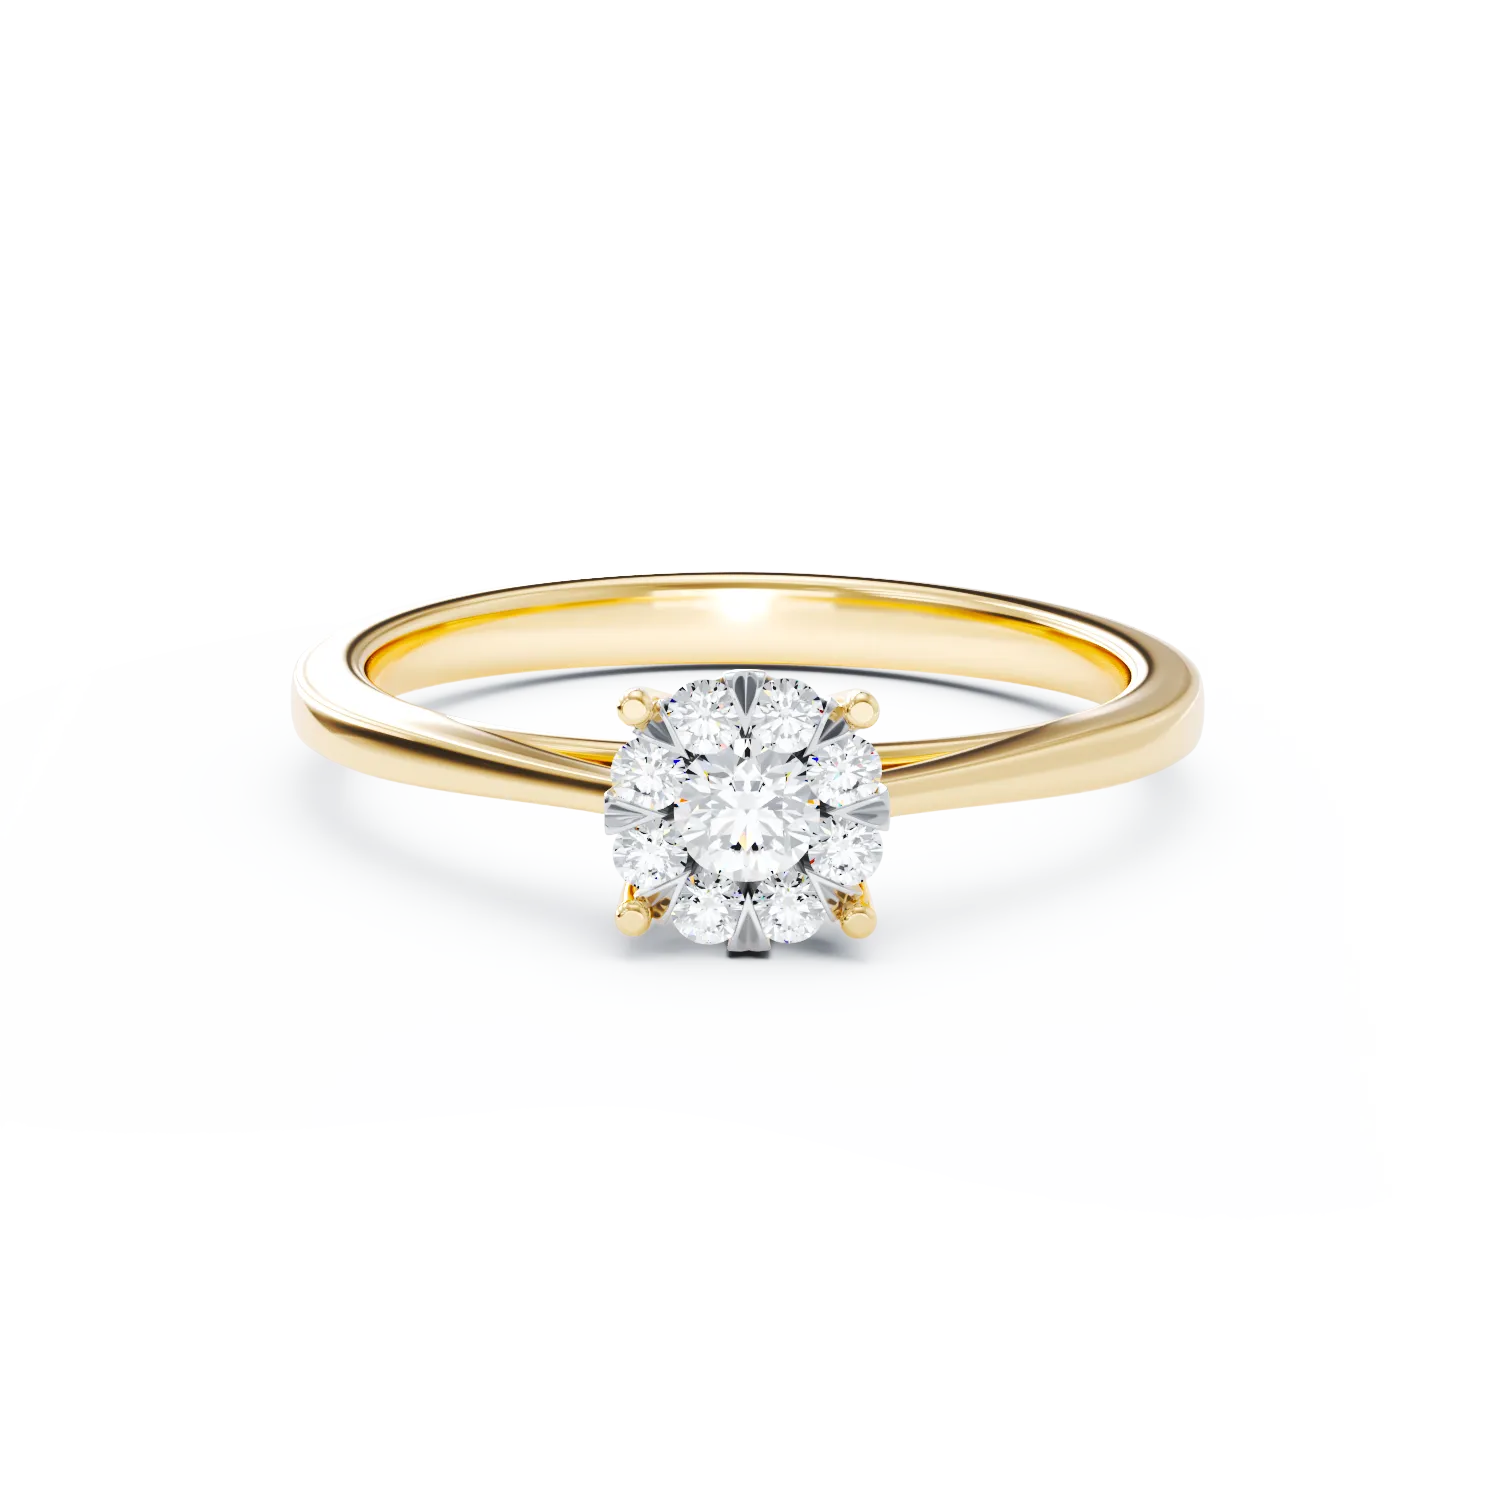 18K yellow gold engagement ring with diamonds of 0.2ct